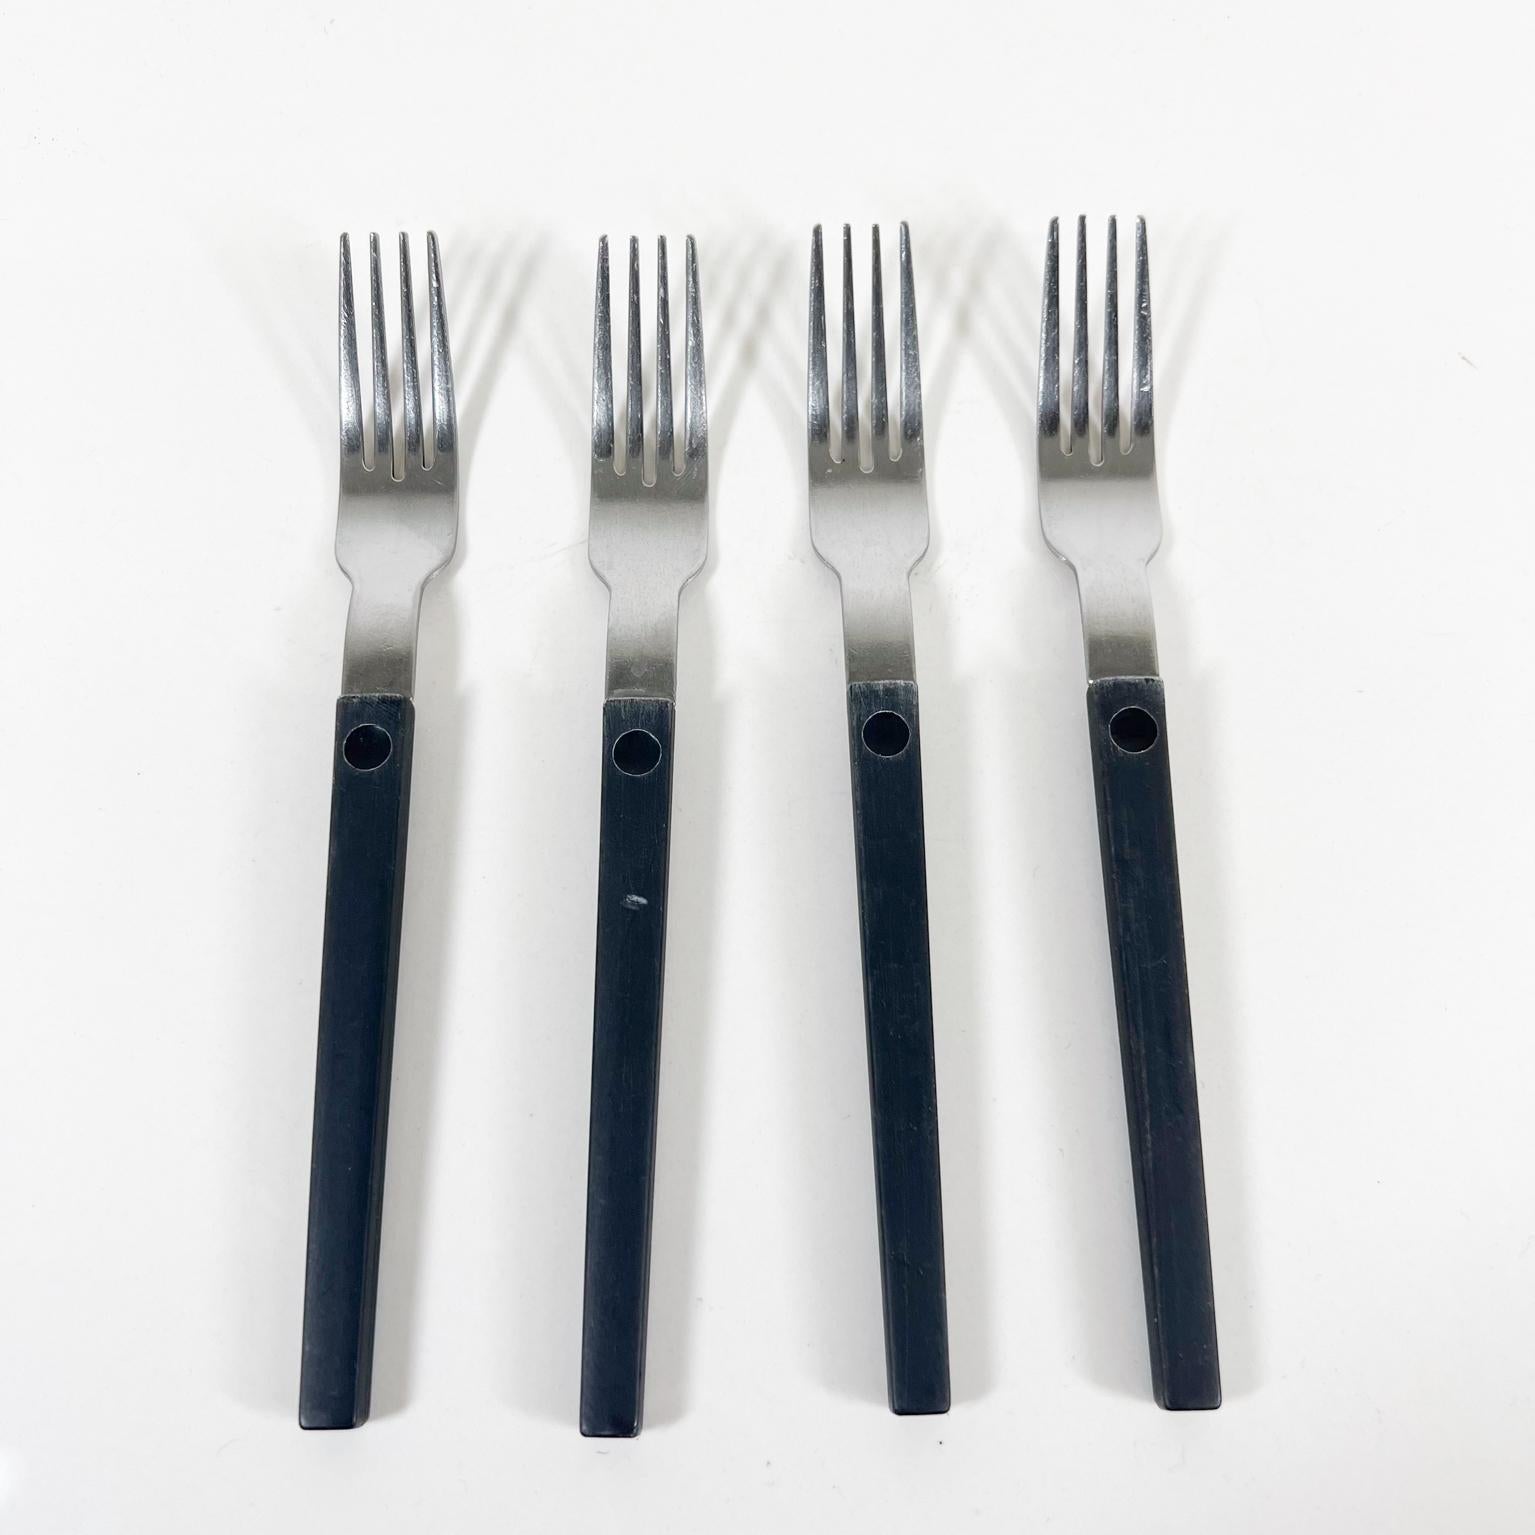 Mid-Century Modern 1970s Set of Four Black Forks + One Spoon MCM Flatware Style Raymond Loewy